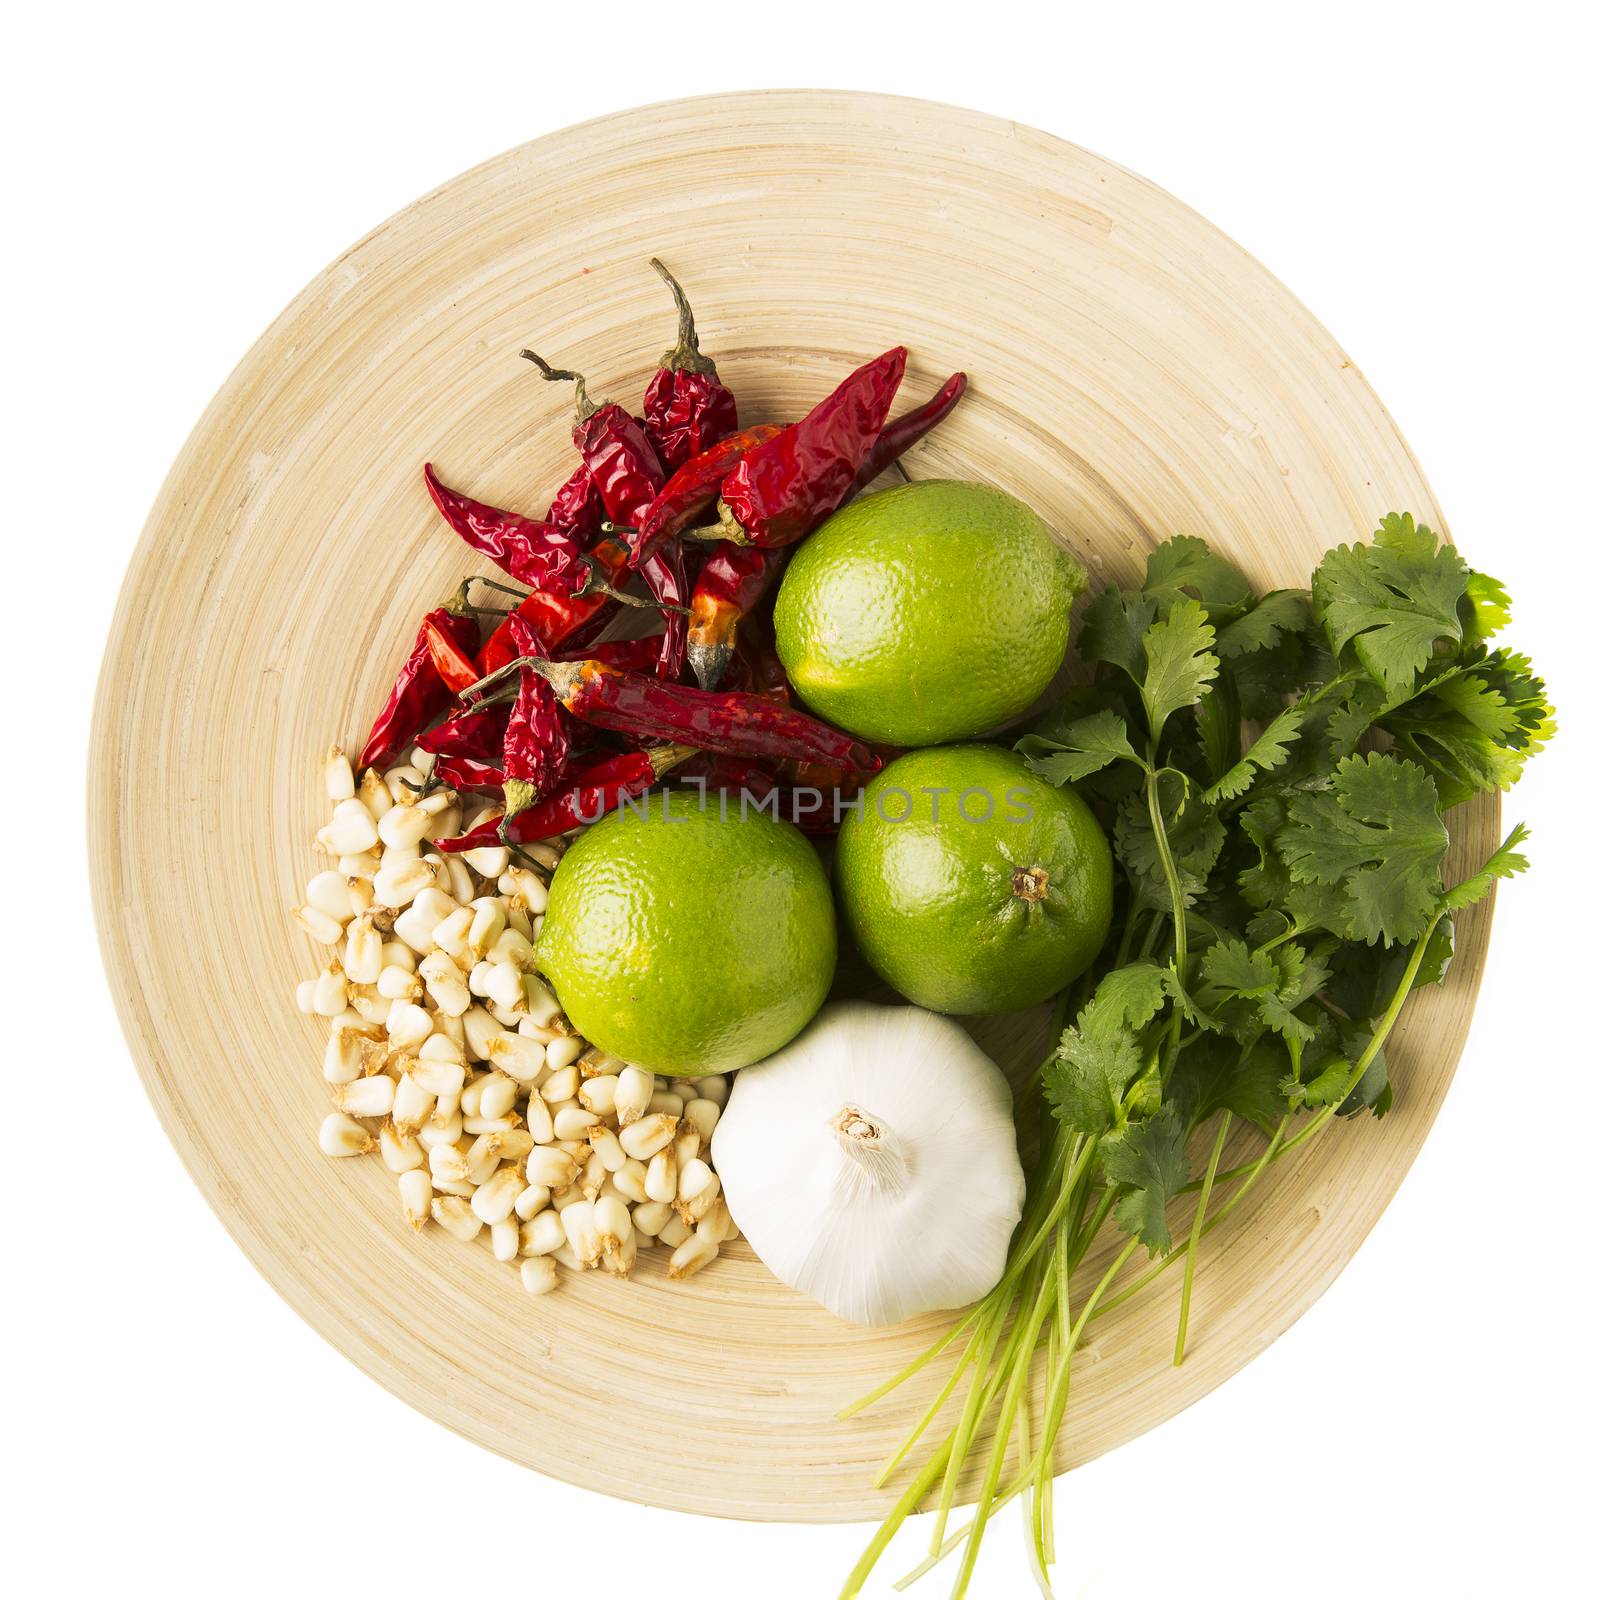 Dried hominy, garlic, lime, cilantro and hot peppers: ingredients for a version of a posole.  On wooden plate and isolated on a white background.